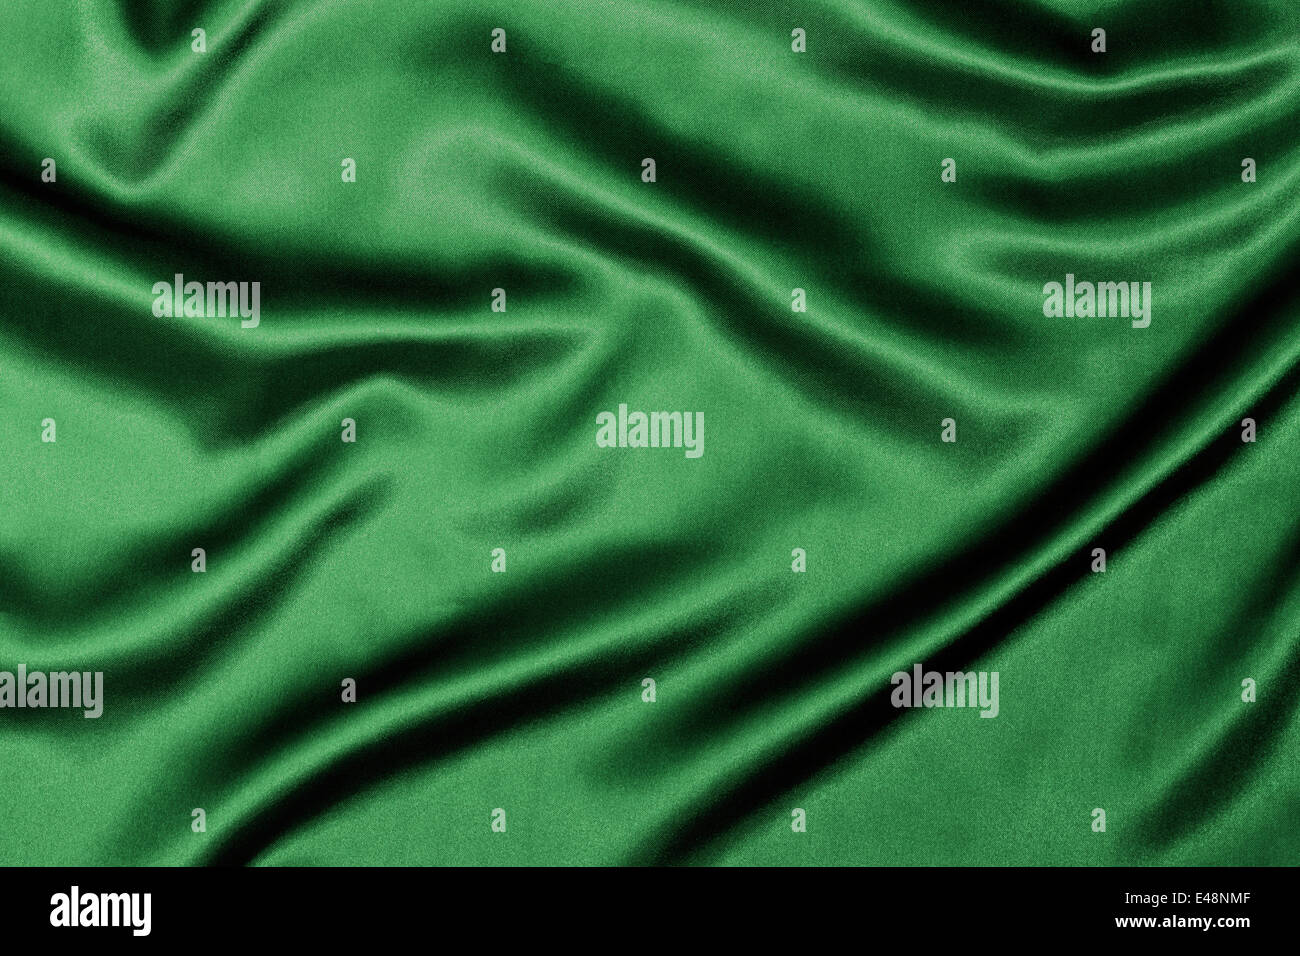 Green Silk background texture with wavy ripples to enhance the sheen of the fabric. Stock Photo